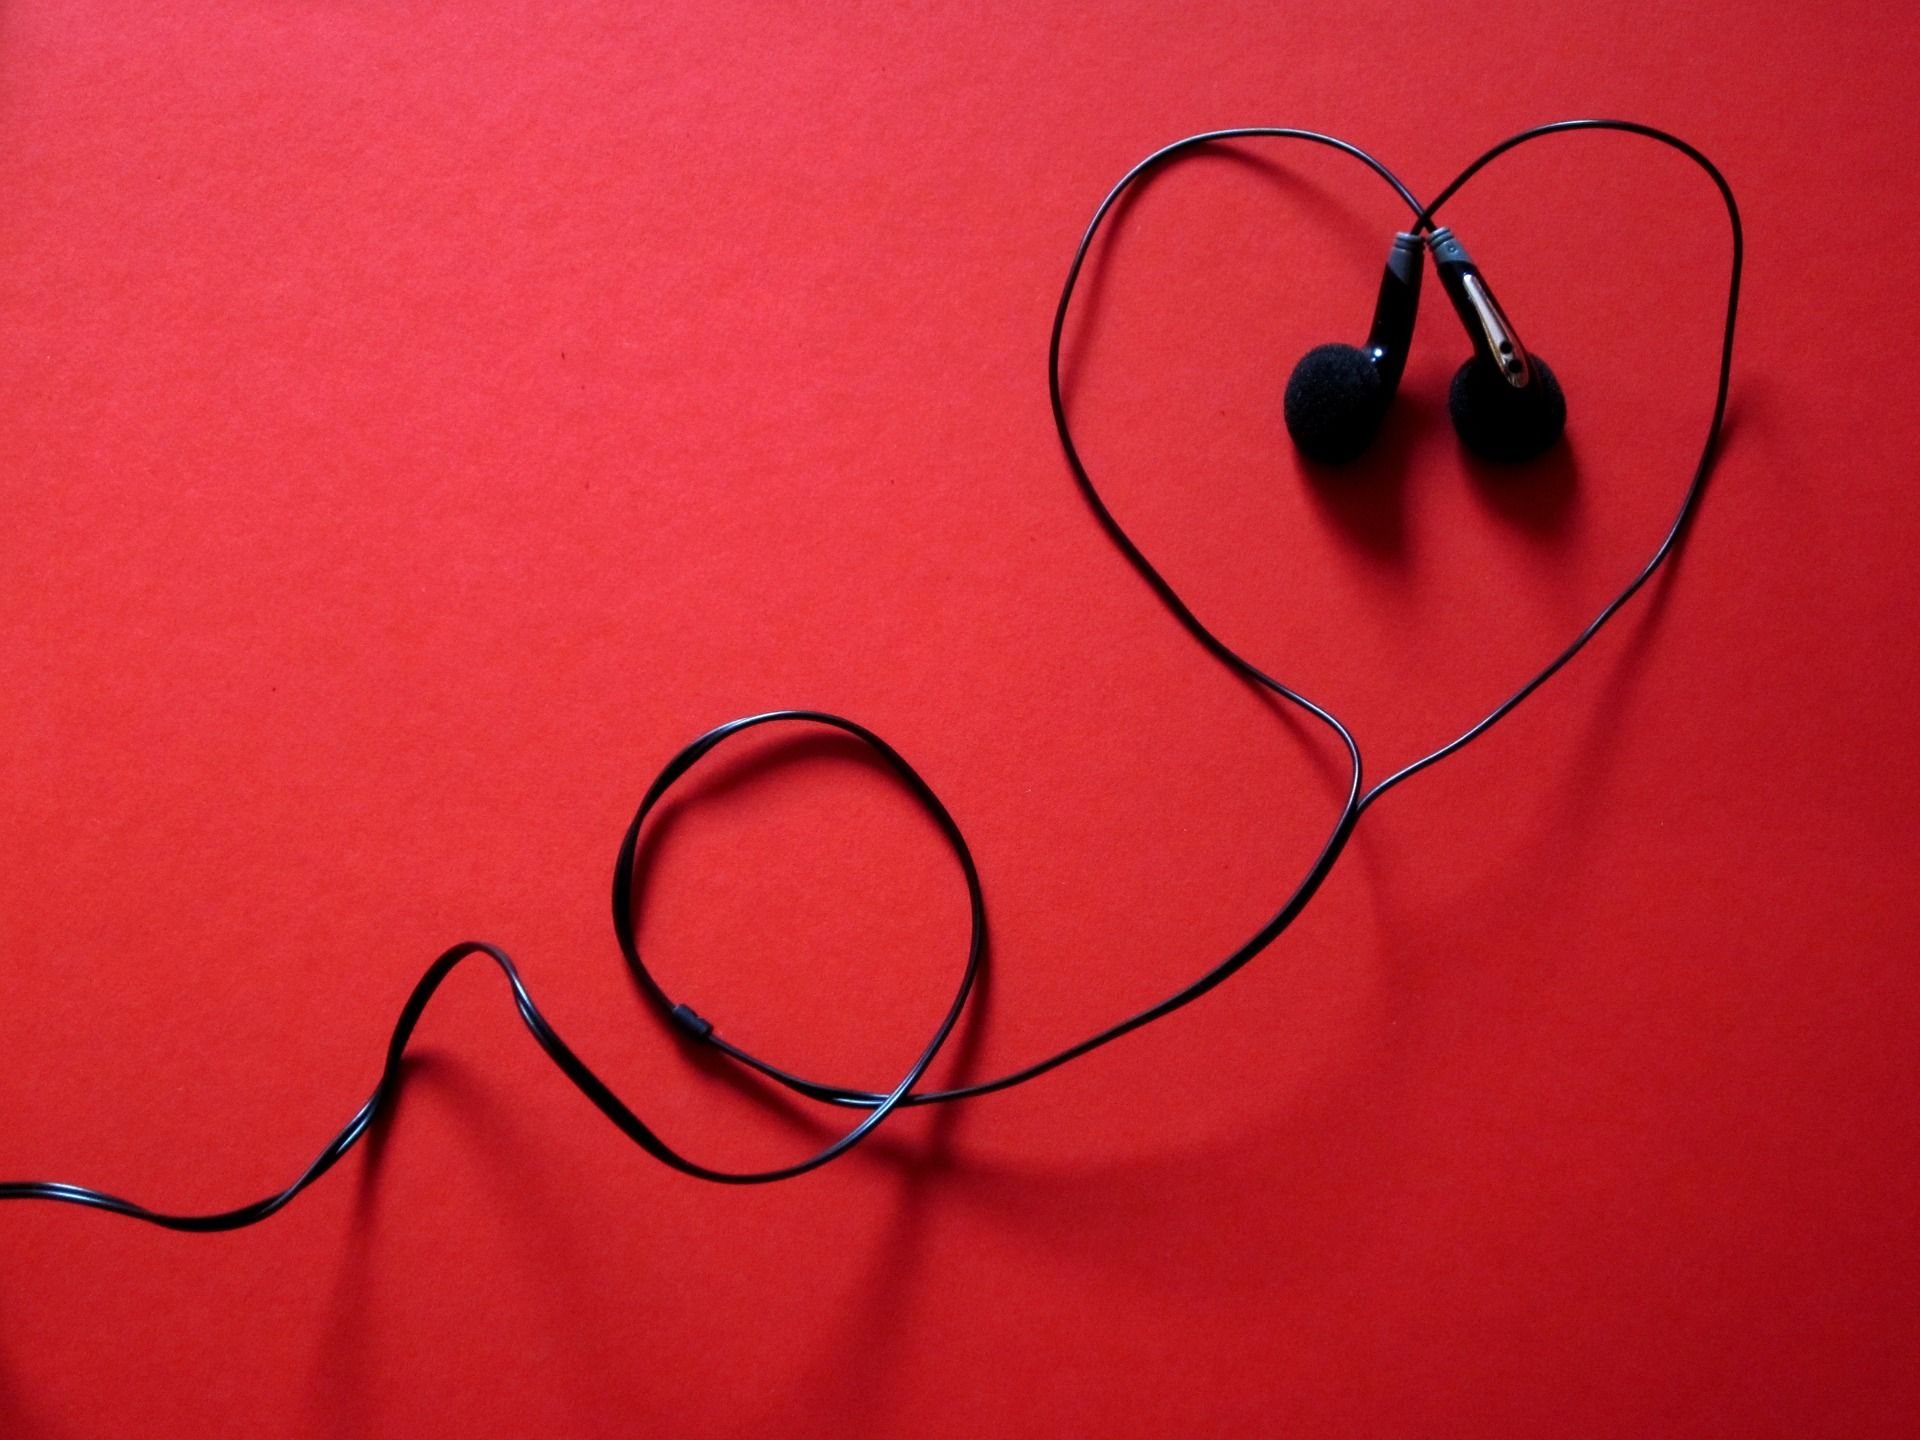 black earbuds in shape of heart on red background